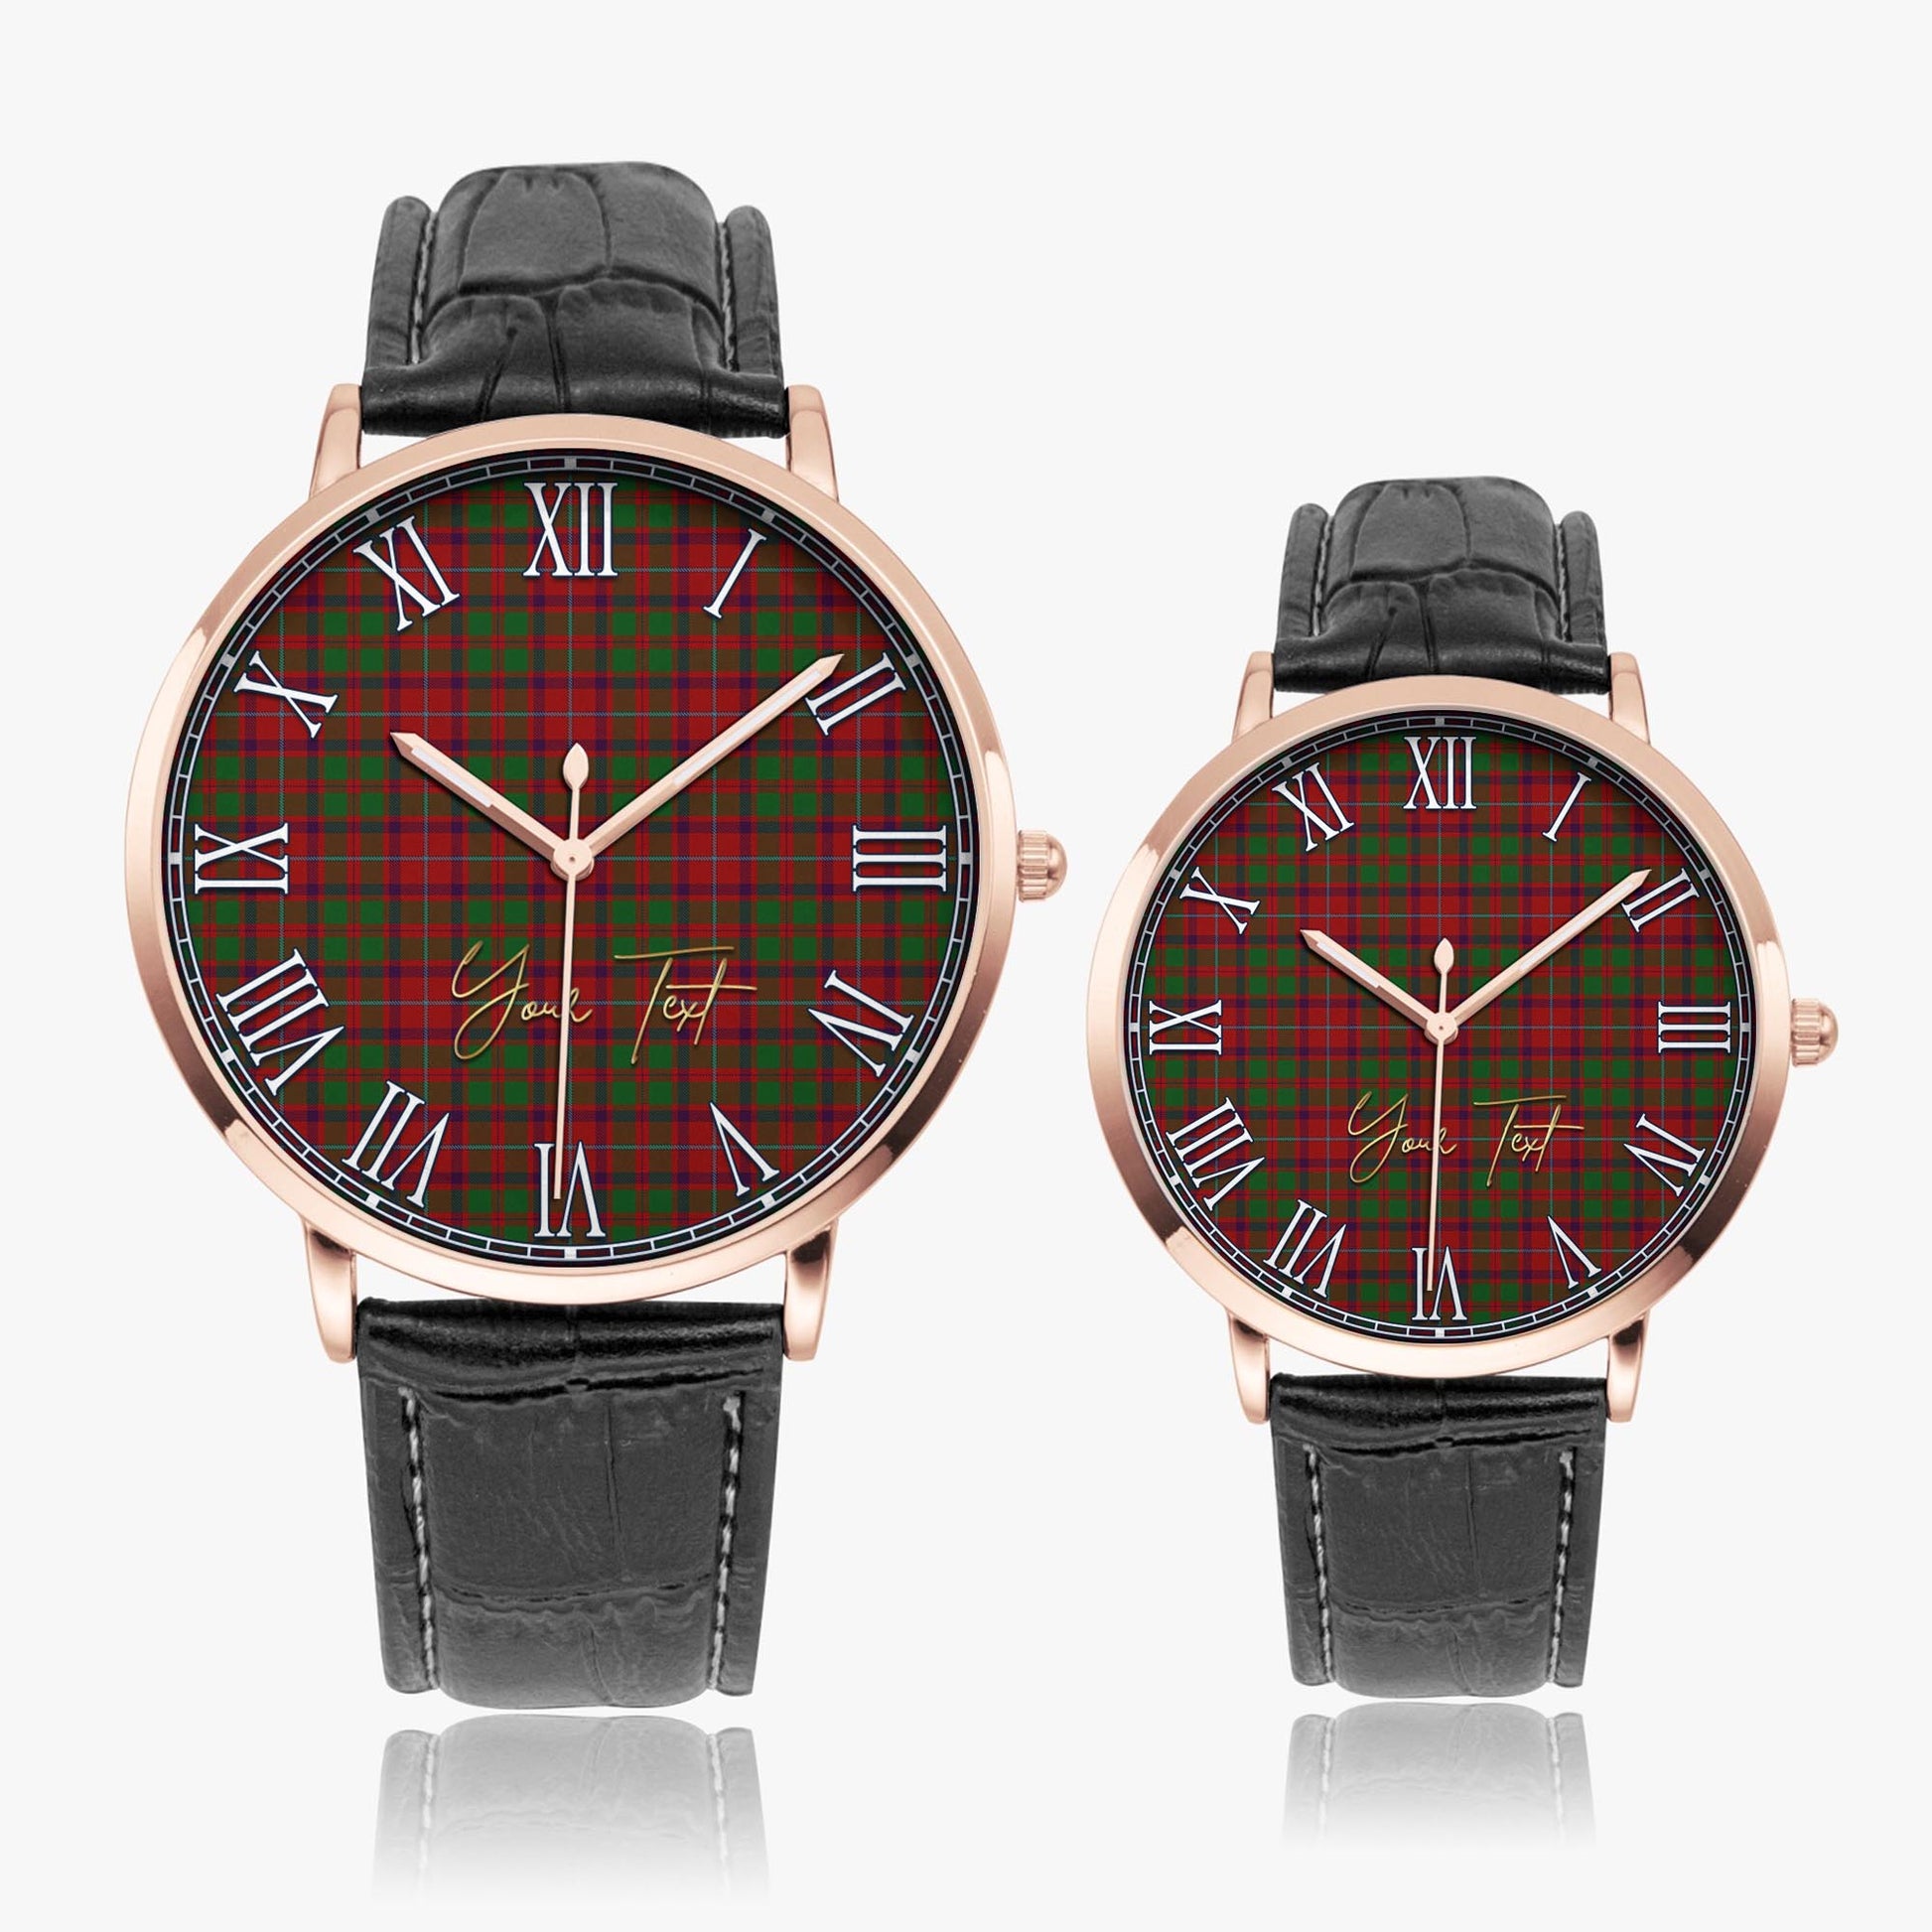 Shaw of Tordarroch Red Dress Tartan Personalized Your Text Leather Trap Quartz Watch Ultra Thin Rose Gold Case With Black Leather Strap - Tartanvibesclothing